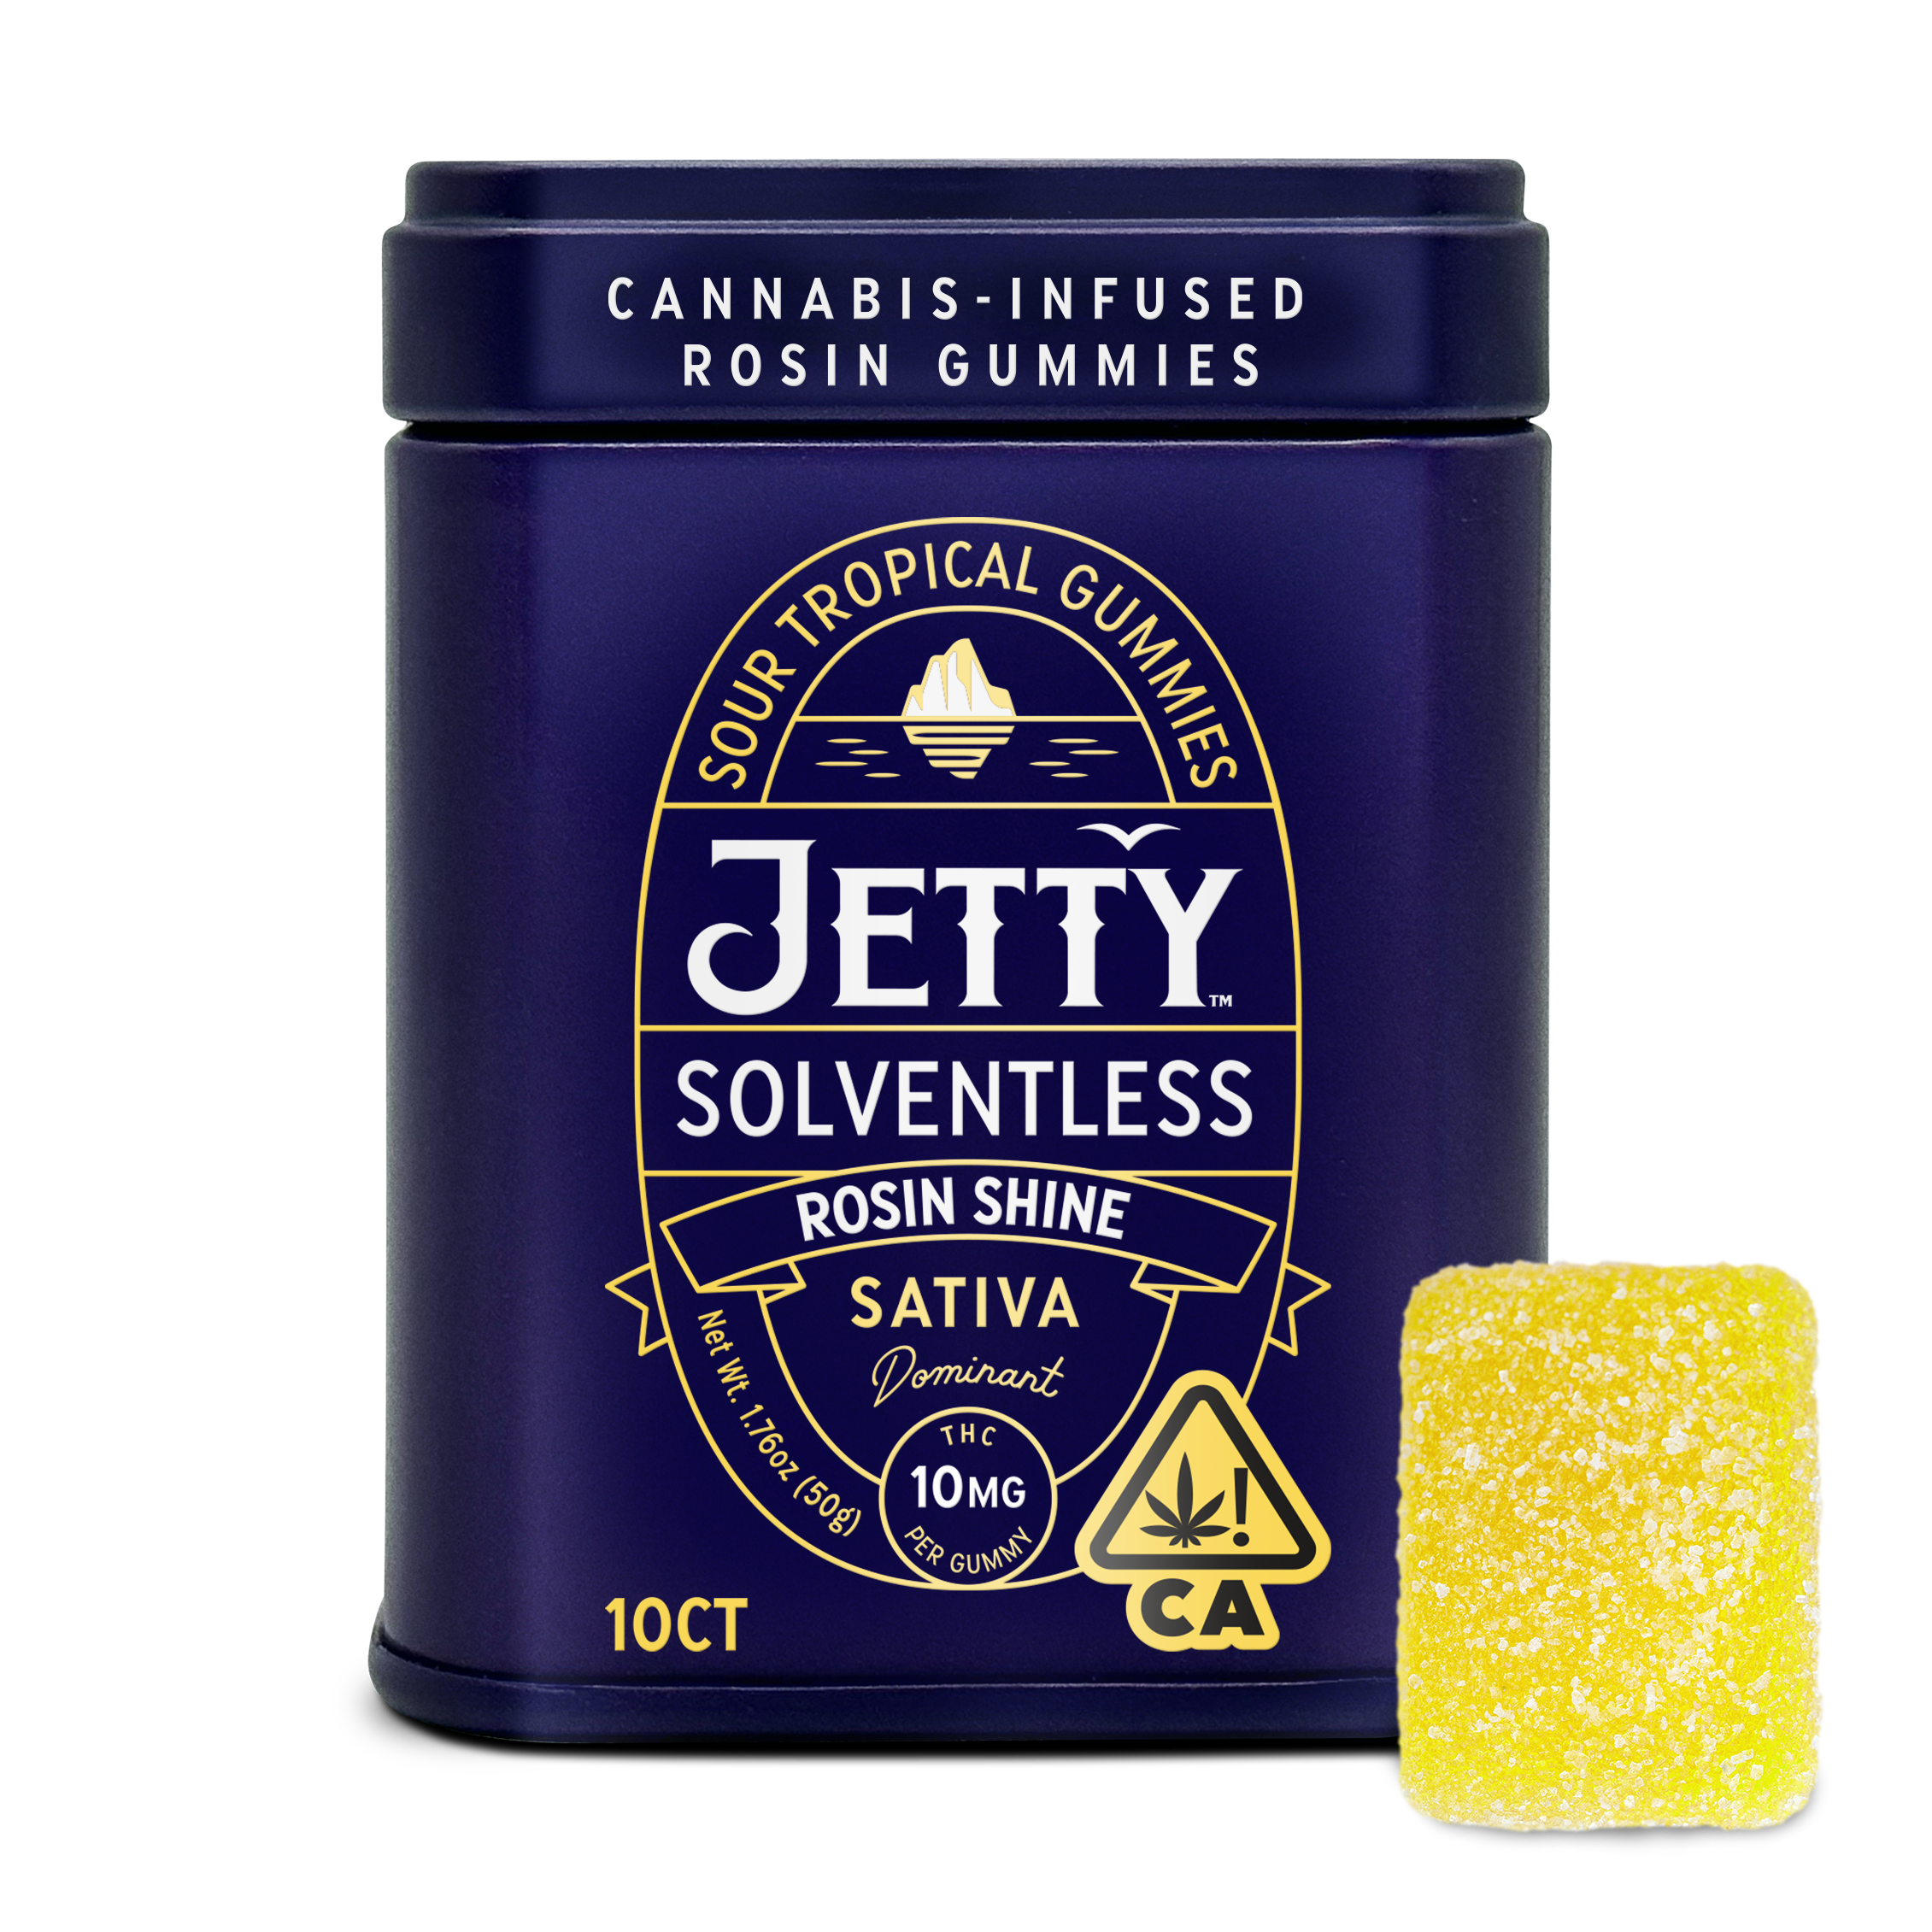 A photograph of Jetty Solventless Rosin Gummies 10ct Tin Sour Tropical Rosin Shine